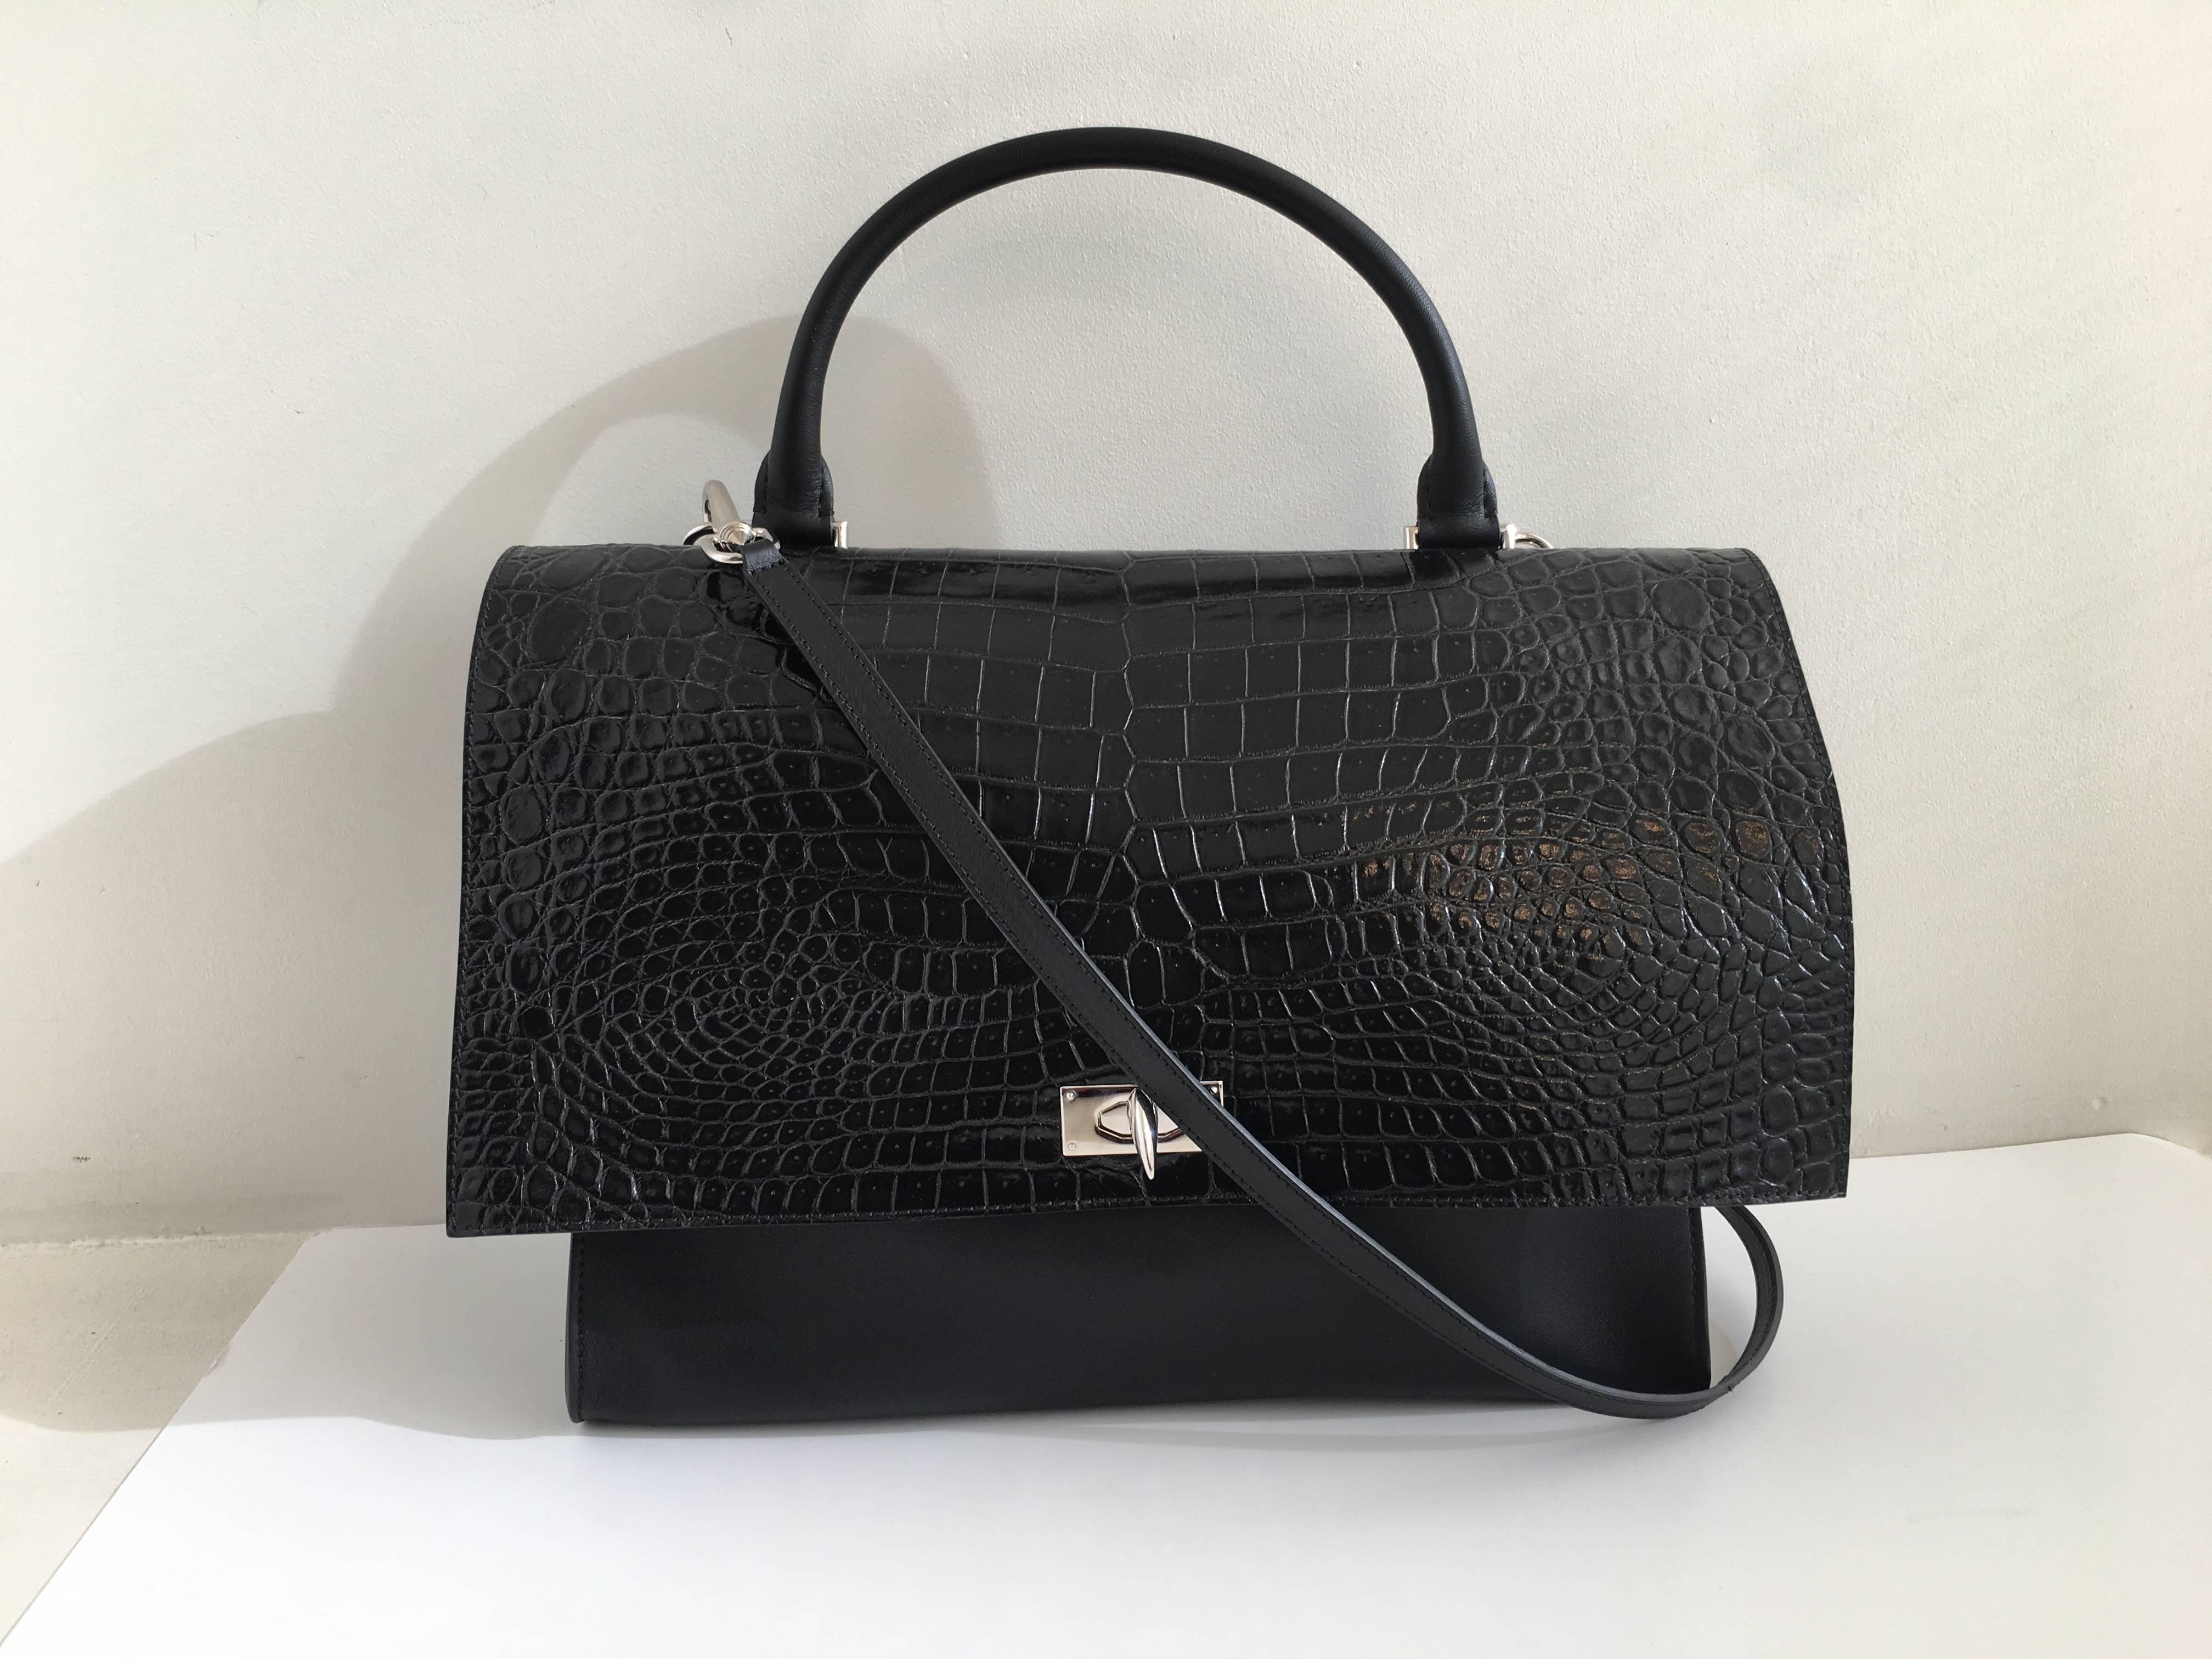 Black Givenchy 'Shark' bag crafted in Italy in black calf leather and a mock croc wider flap. It has a top handle and a detachable shoulder strap. The twist lock is the iconic shark tooth in silver colored metal. It features a large interior pocket